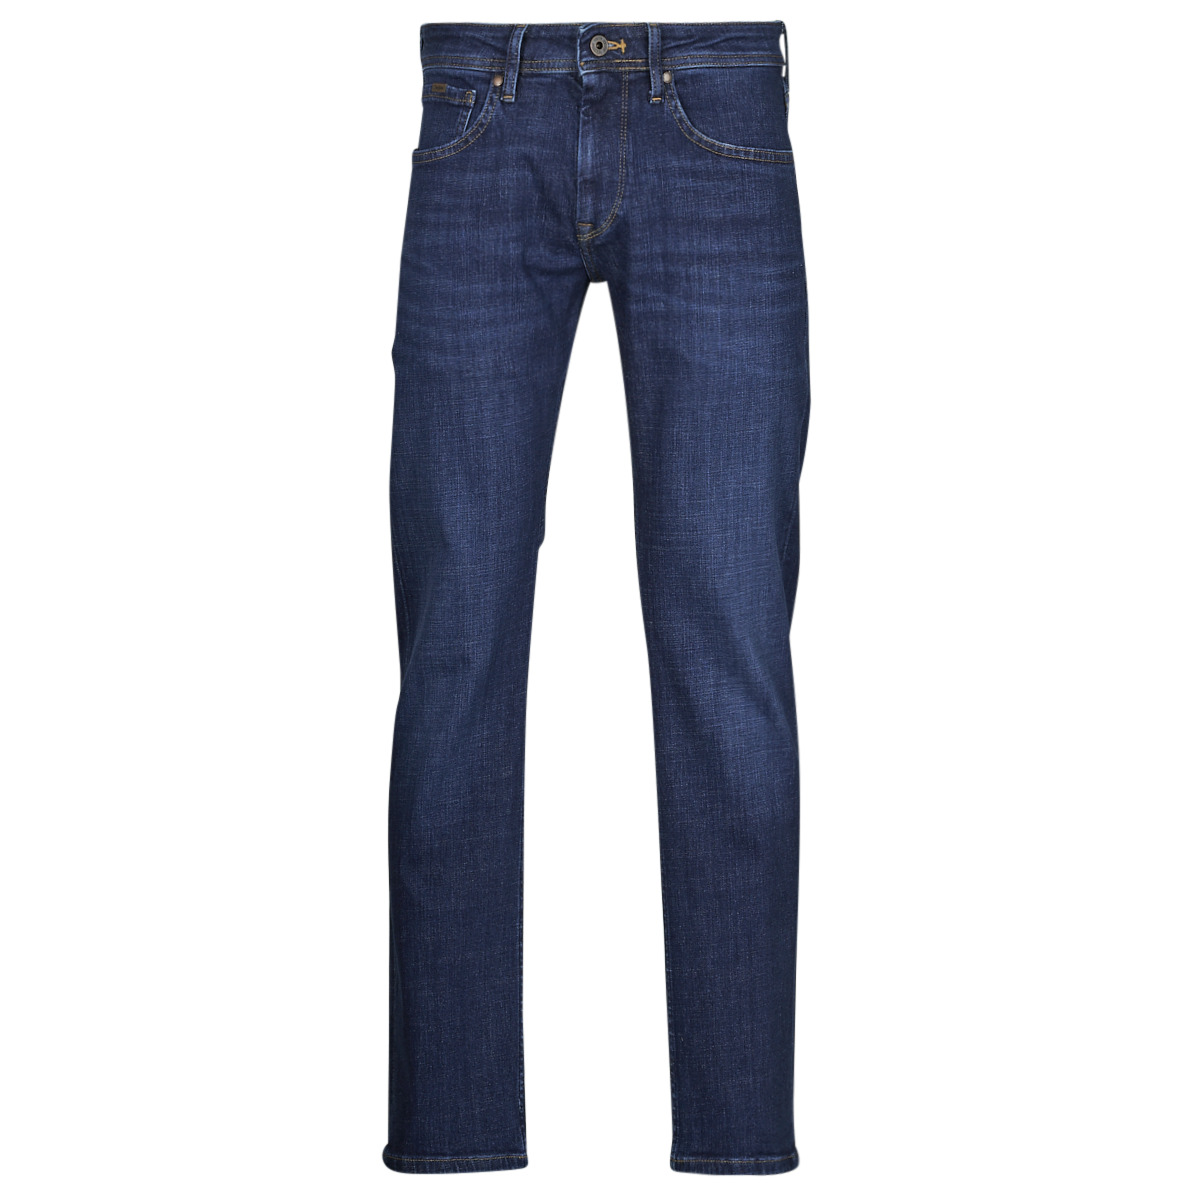 Pepe jeans  Tζιν σε ίσια γραμή Pepe jeans STRAIGHT JEANS